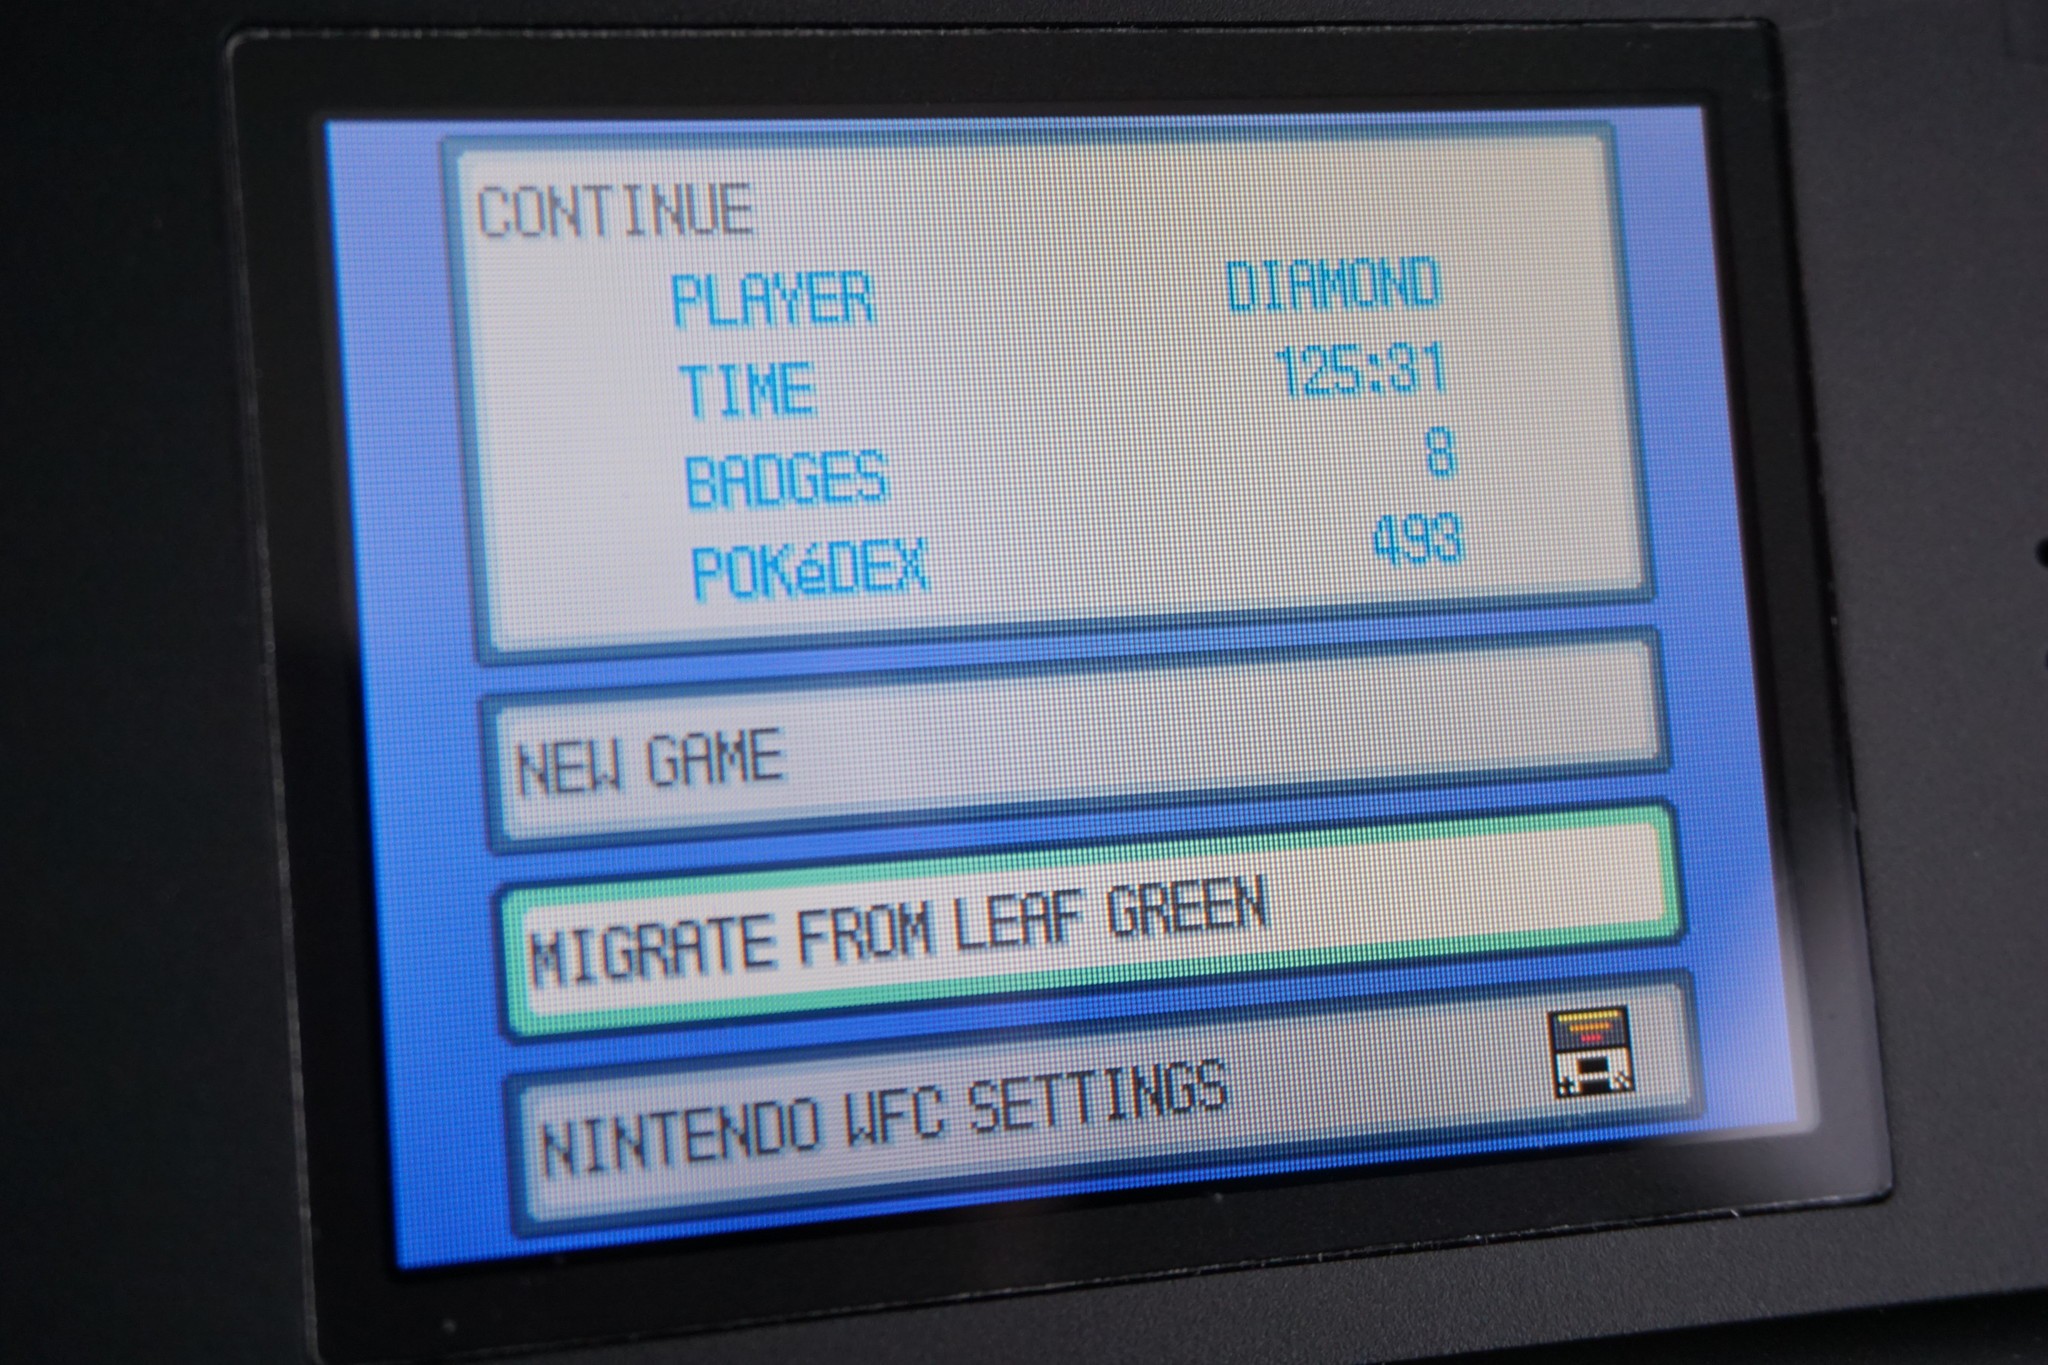 Pokemon Migrate From Leafgreen